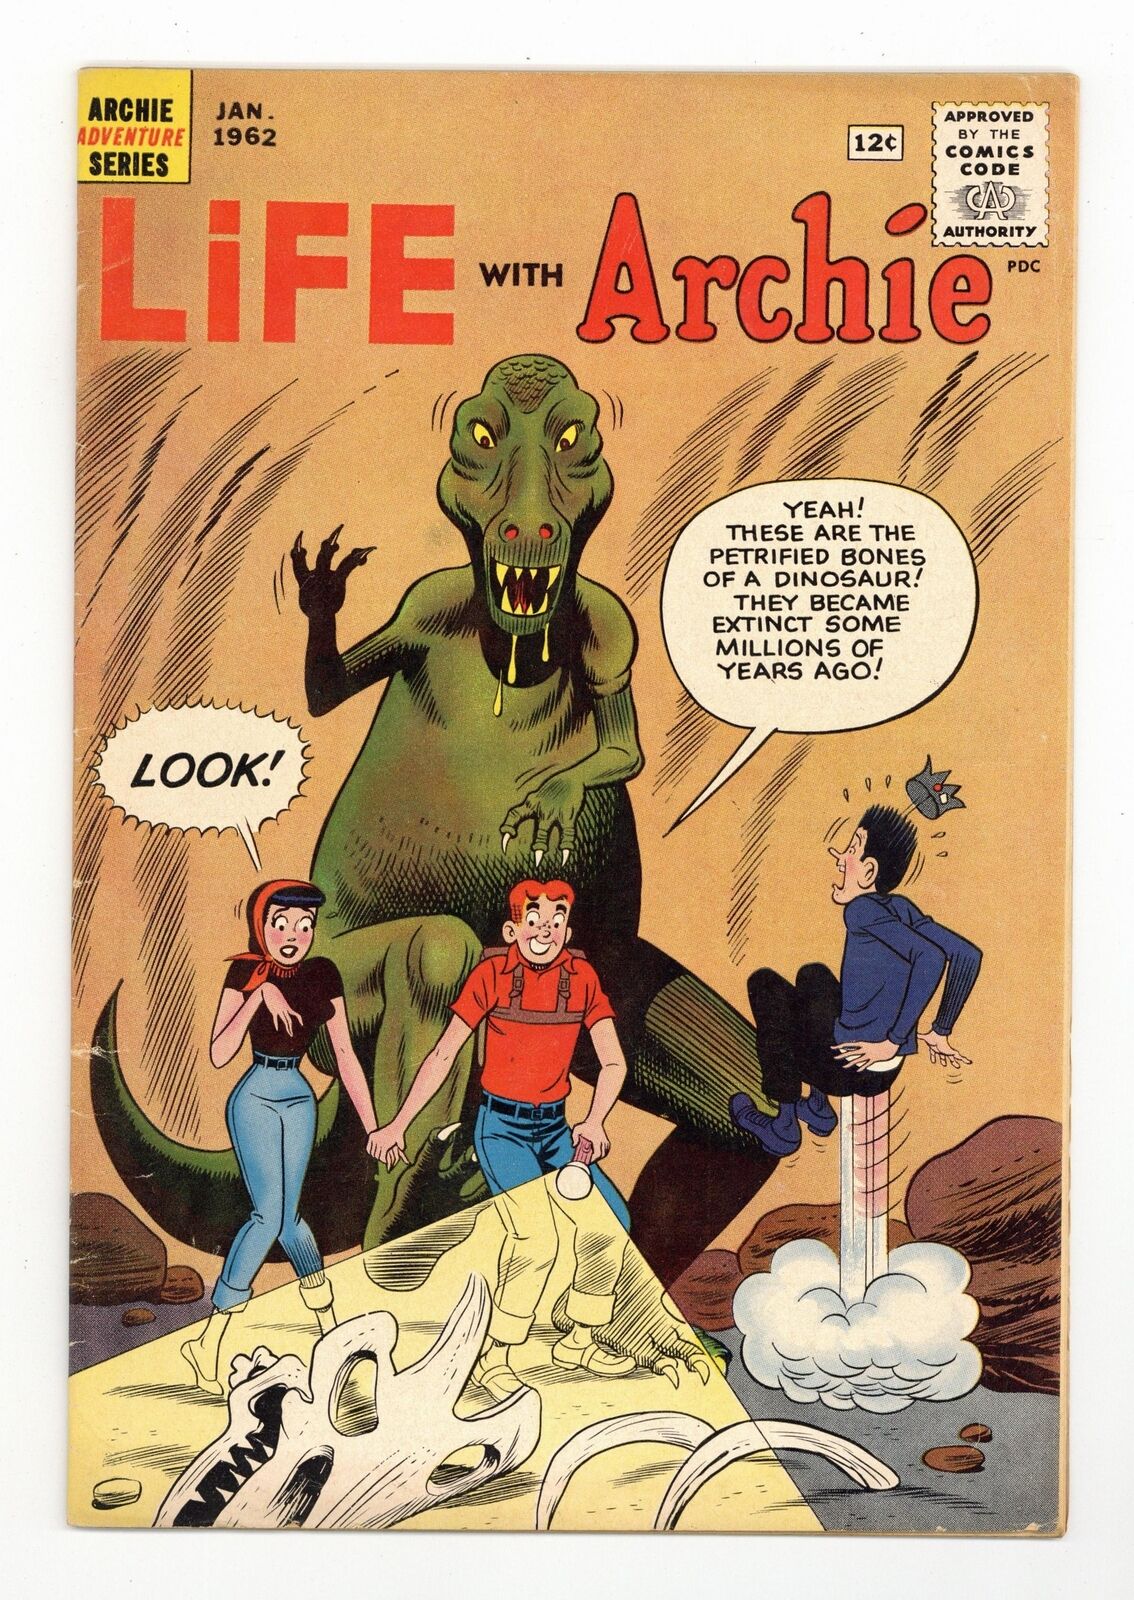 Life with Archie #12 VG/FN 5.0 1962